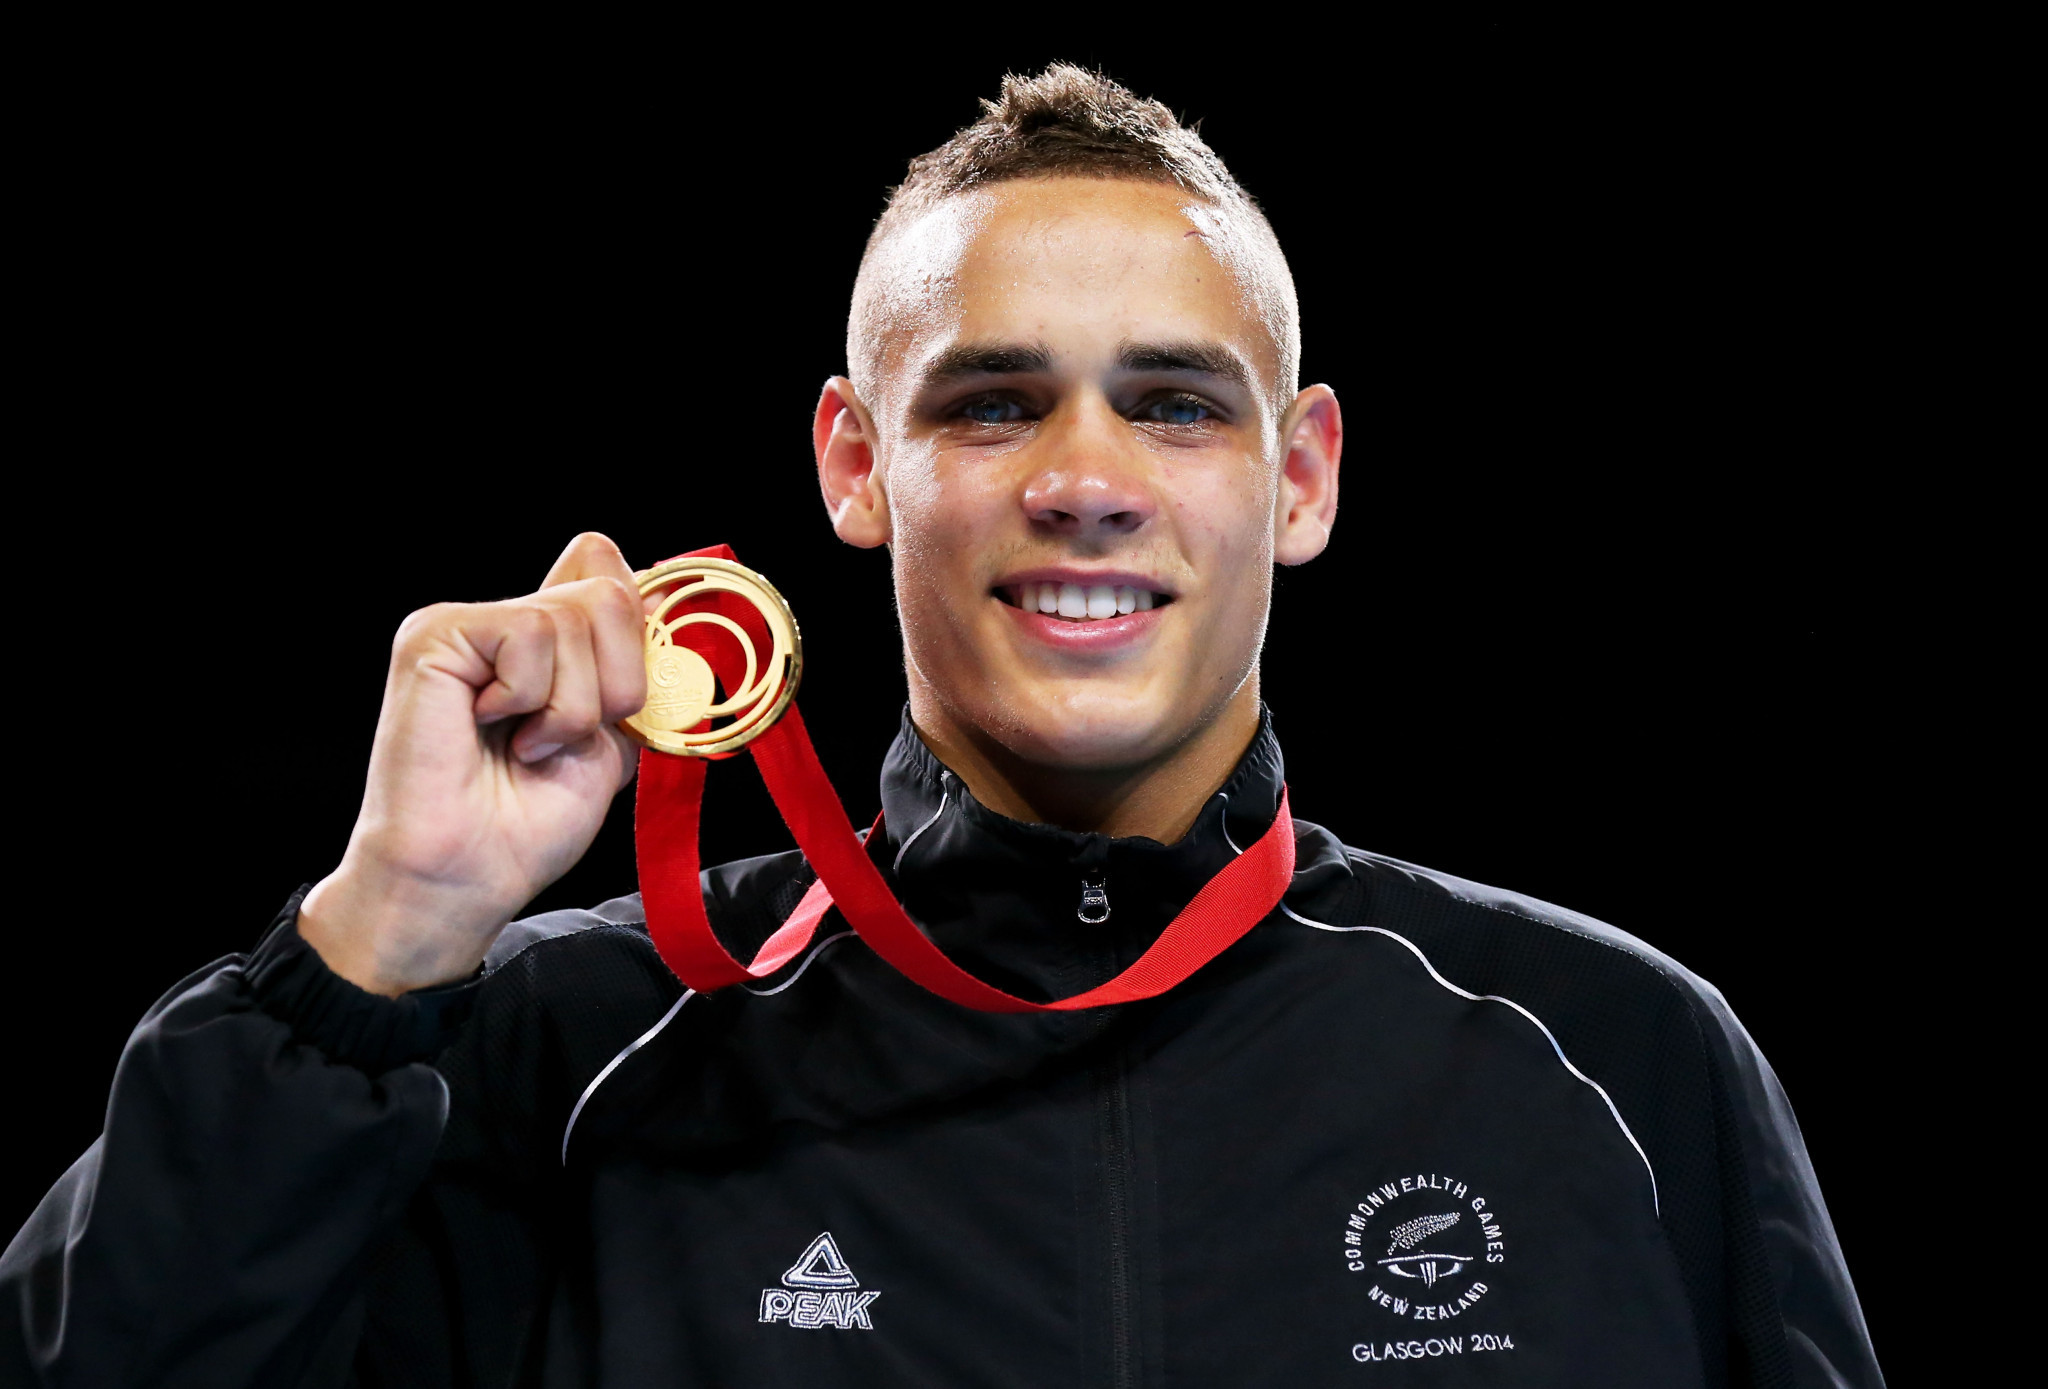 Commonwealth Games champion boxer Nyika has gold medal stolen